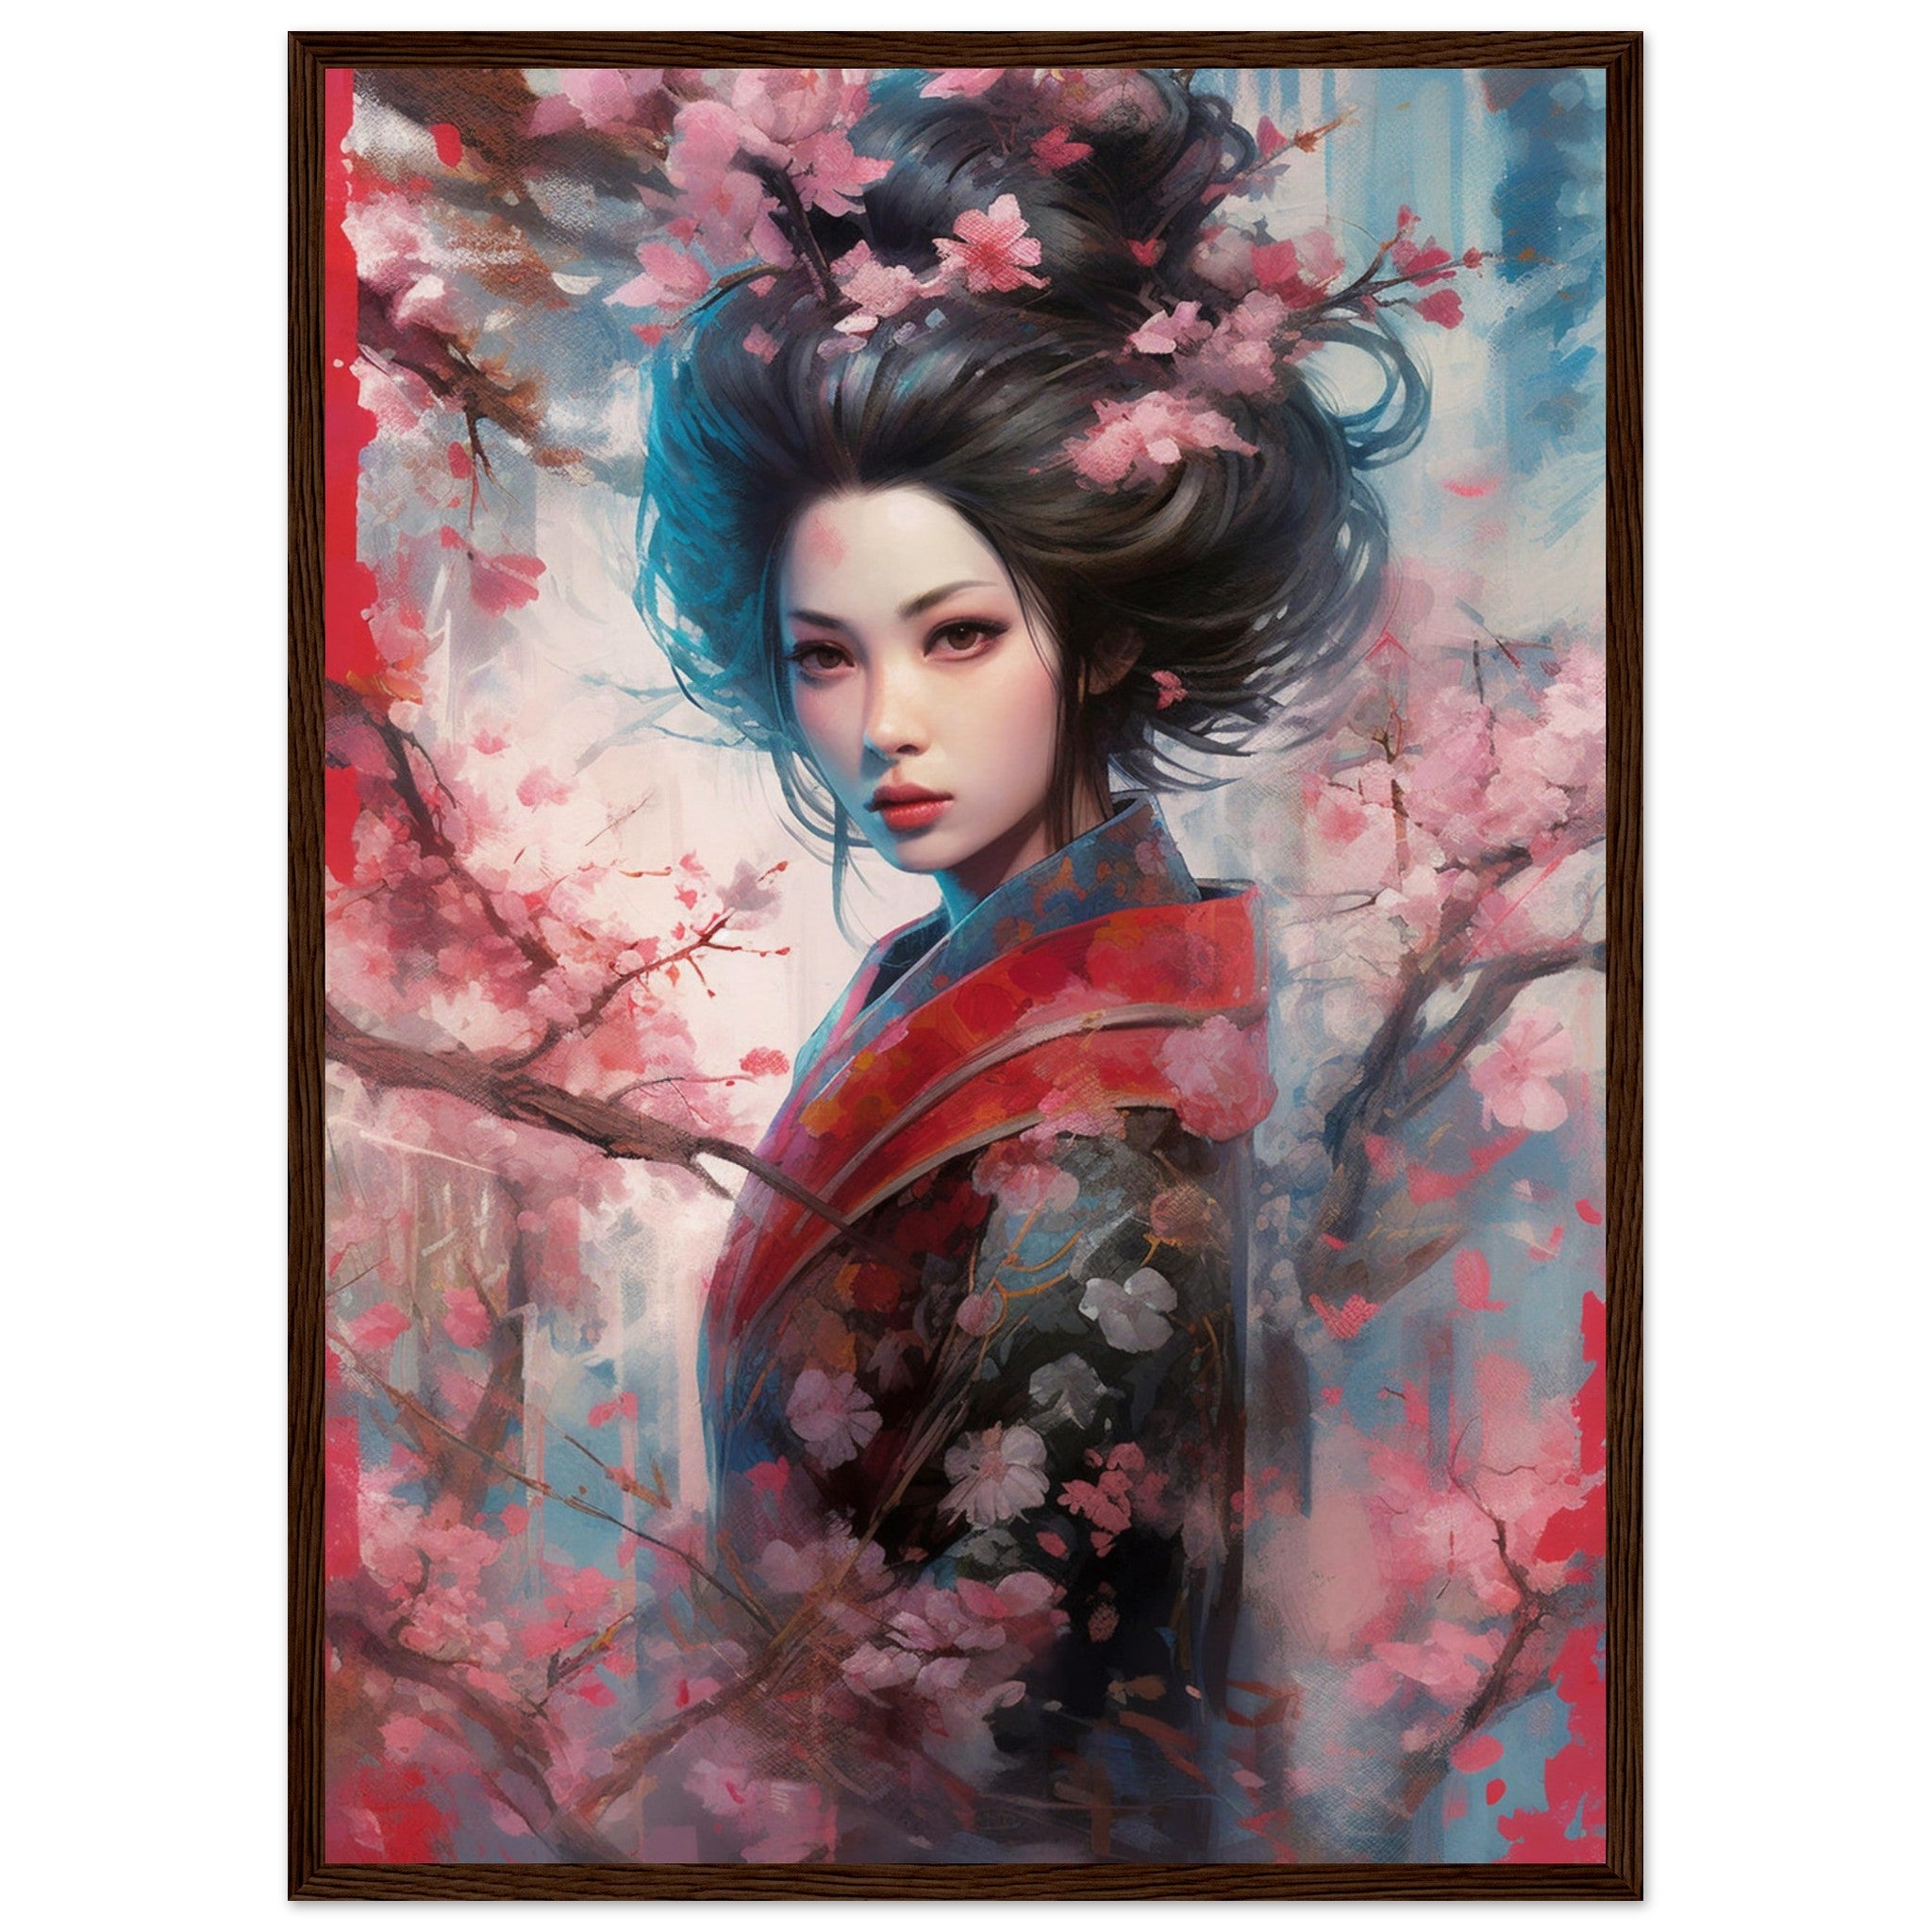 Japanese girl looking through cherry blossoms - immersiarts